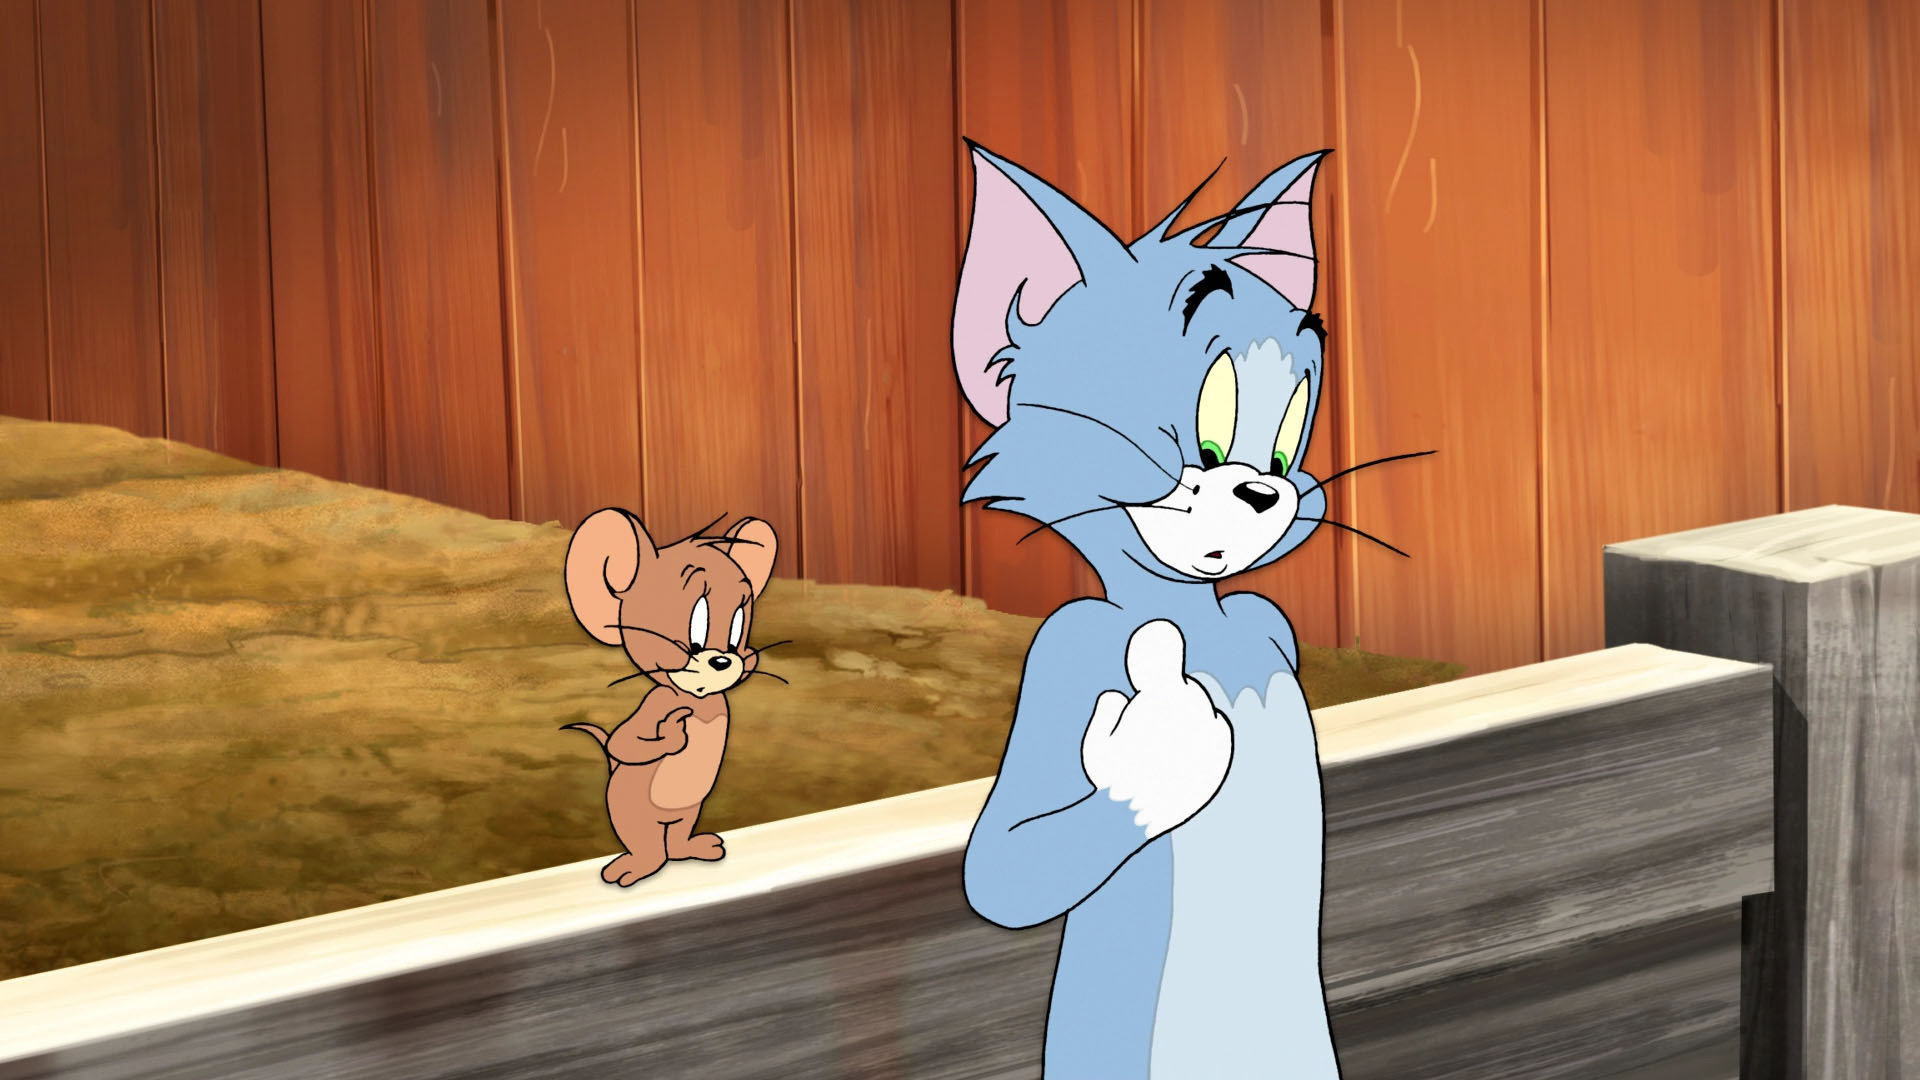 Tom and Jerry wallpapers, HD resolution, Desktop backgrounds, Animated fun, 1920x1080 Full HD Desktop